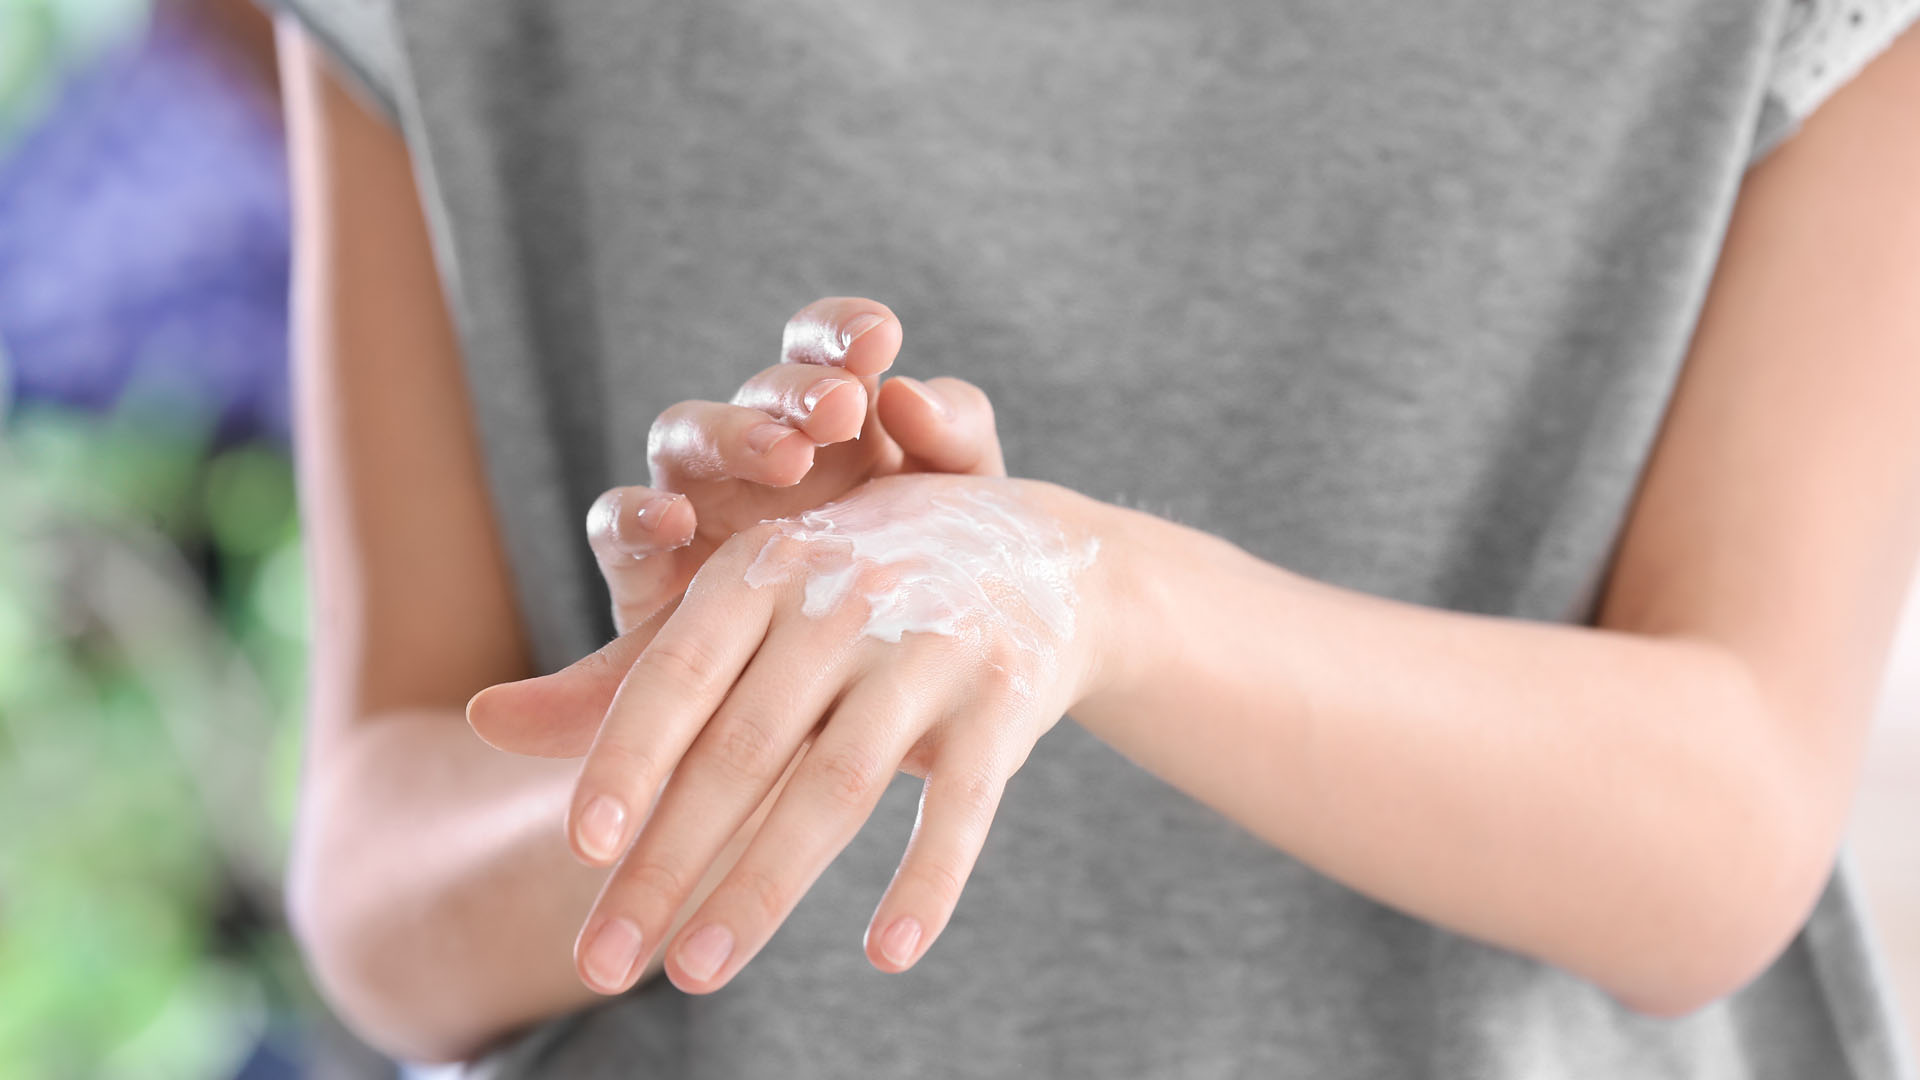 A person is applying lotion to their hands.